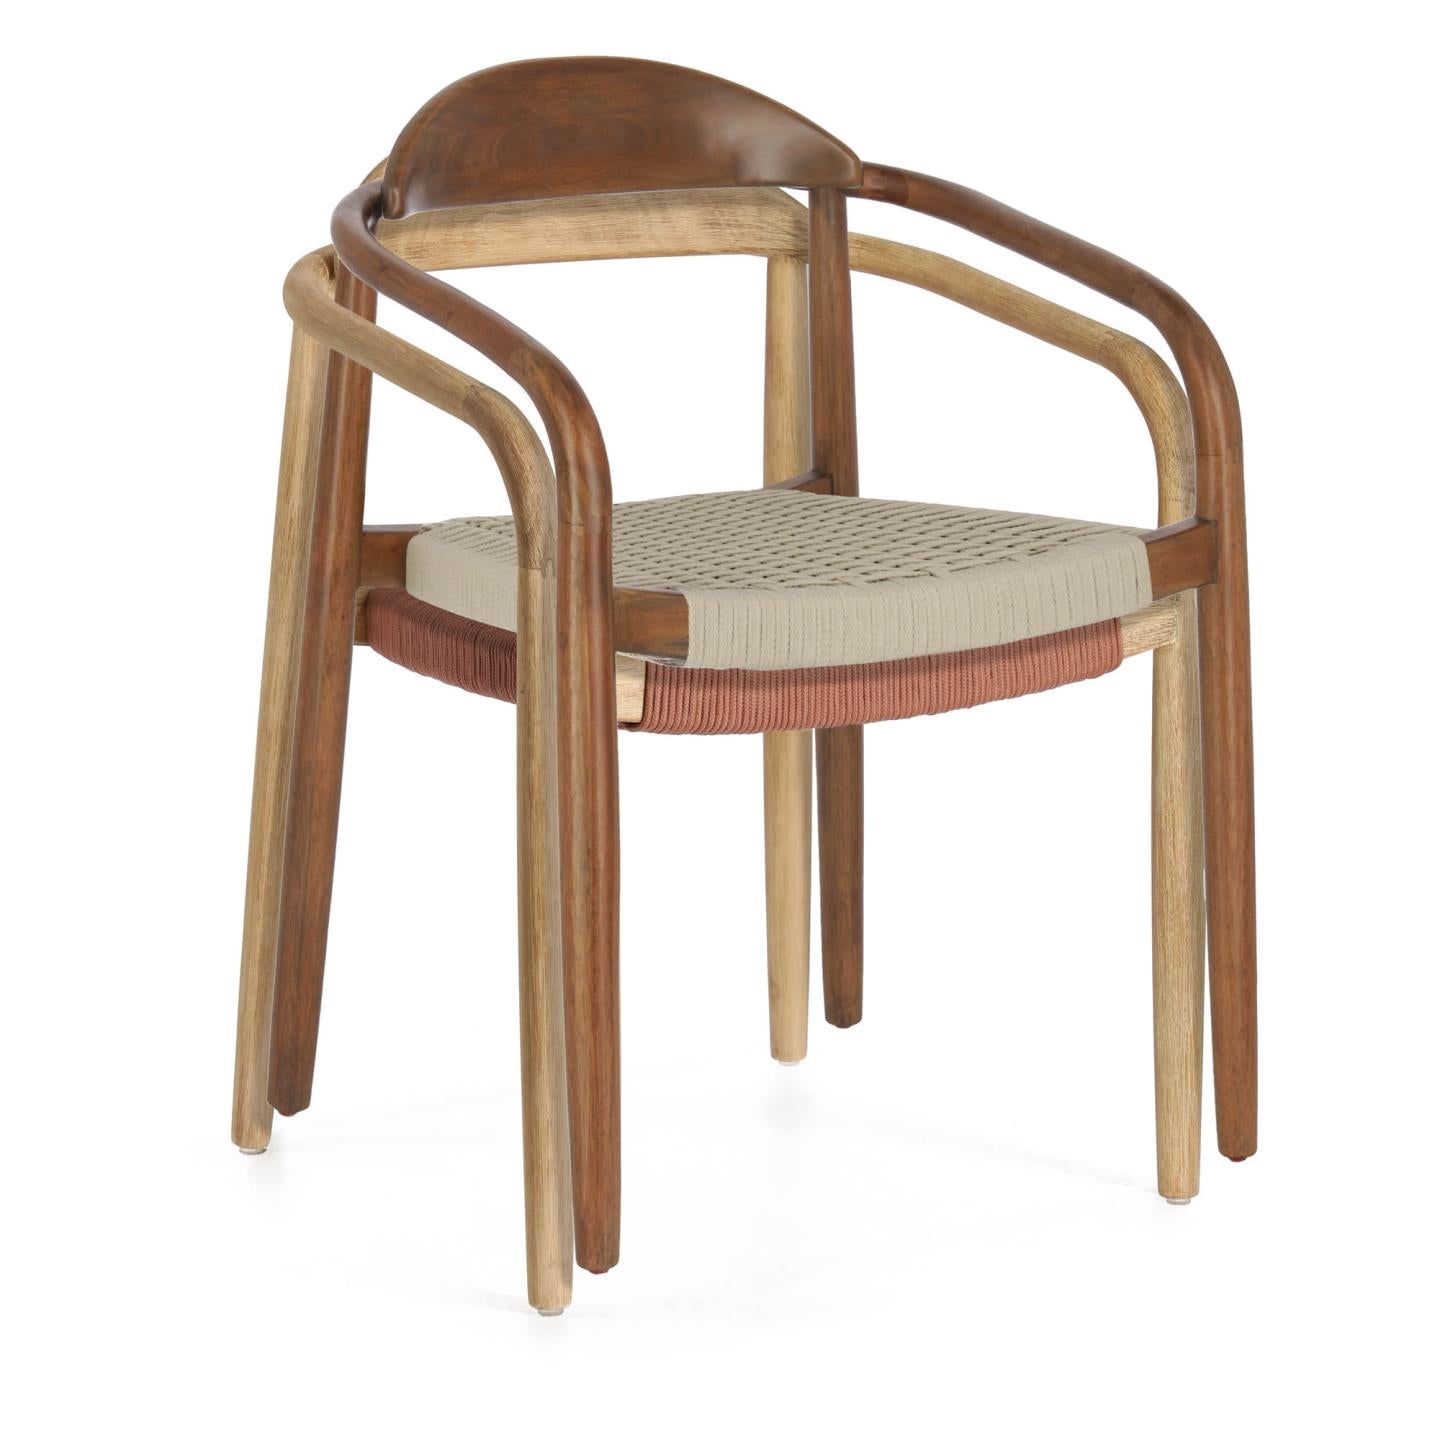 Nina stackable chair in solid acacia wood with walnut finish and beige rope seat